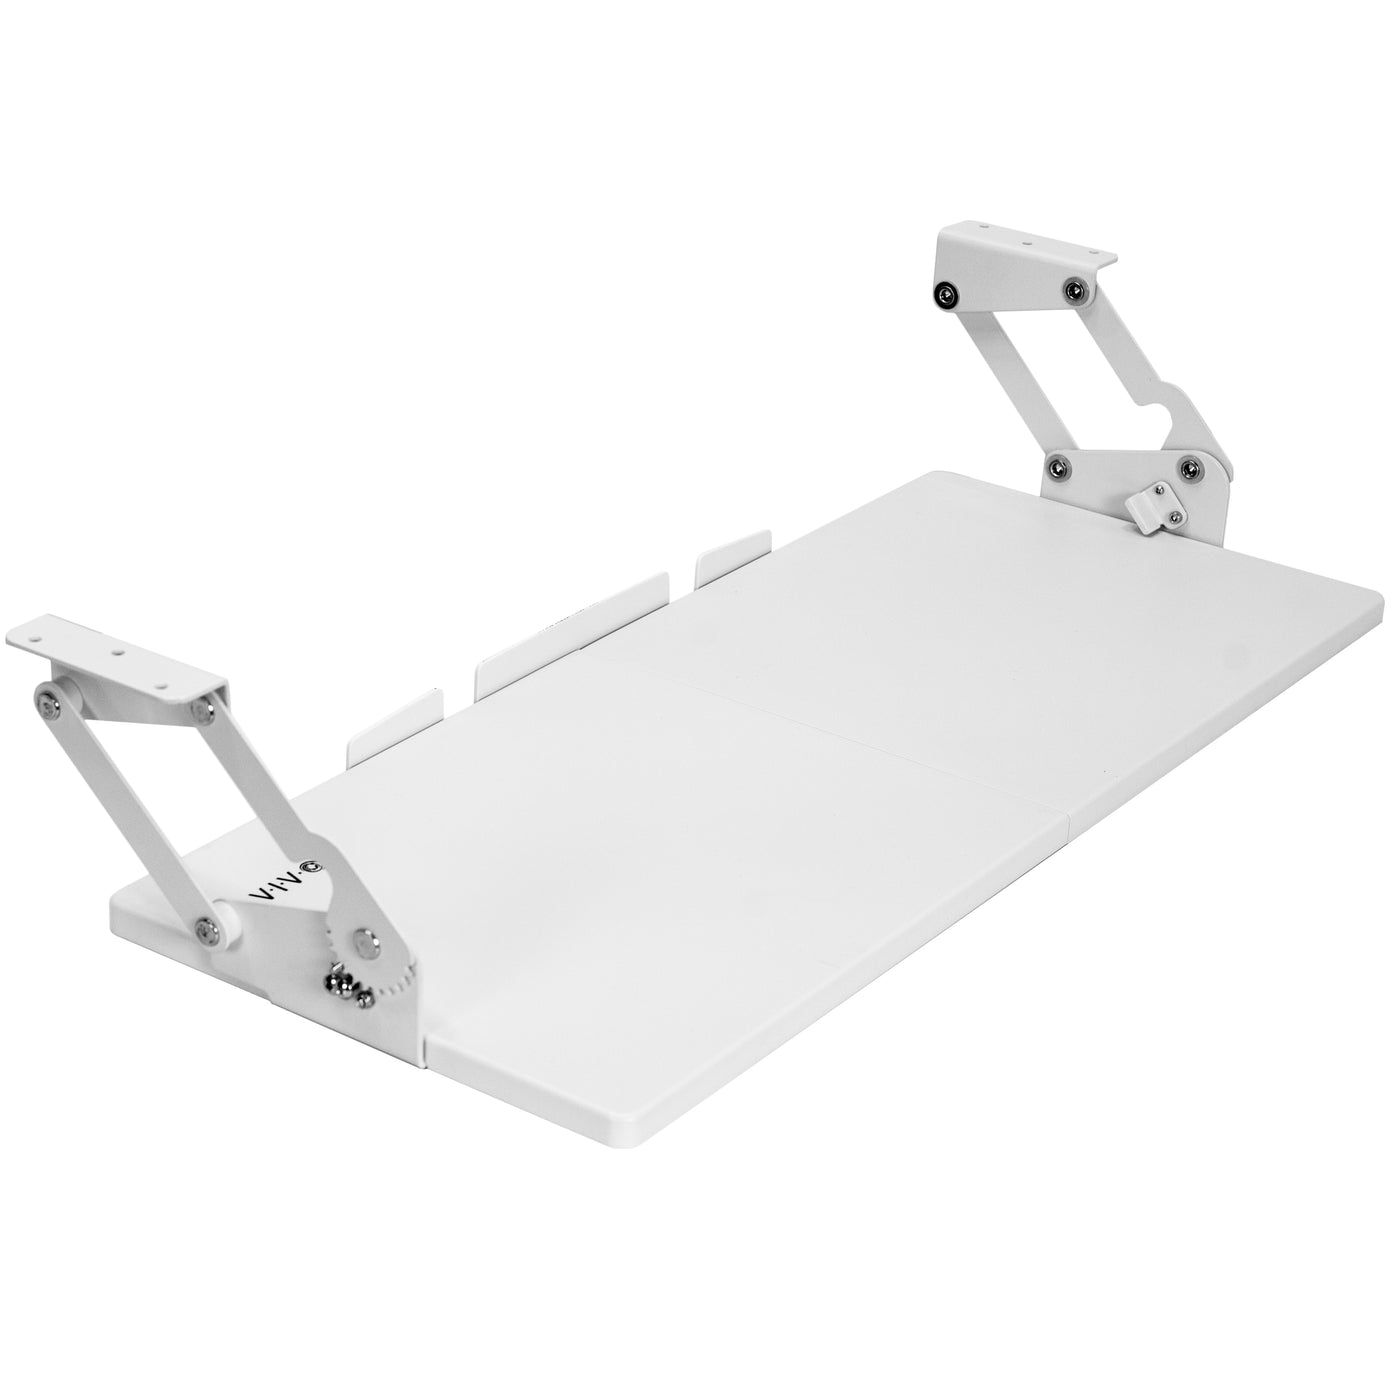 Under Desk Keyboard Tray with Swinging Height Adjustment